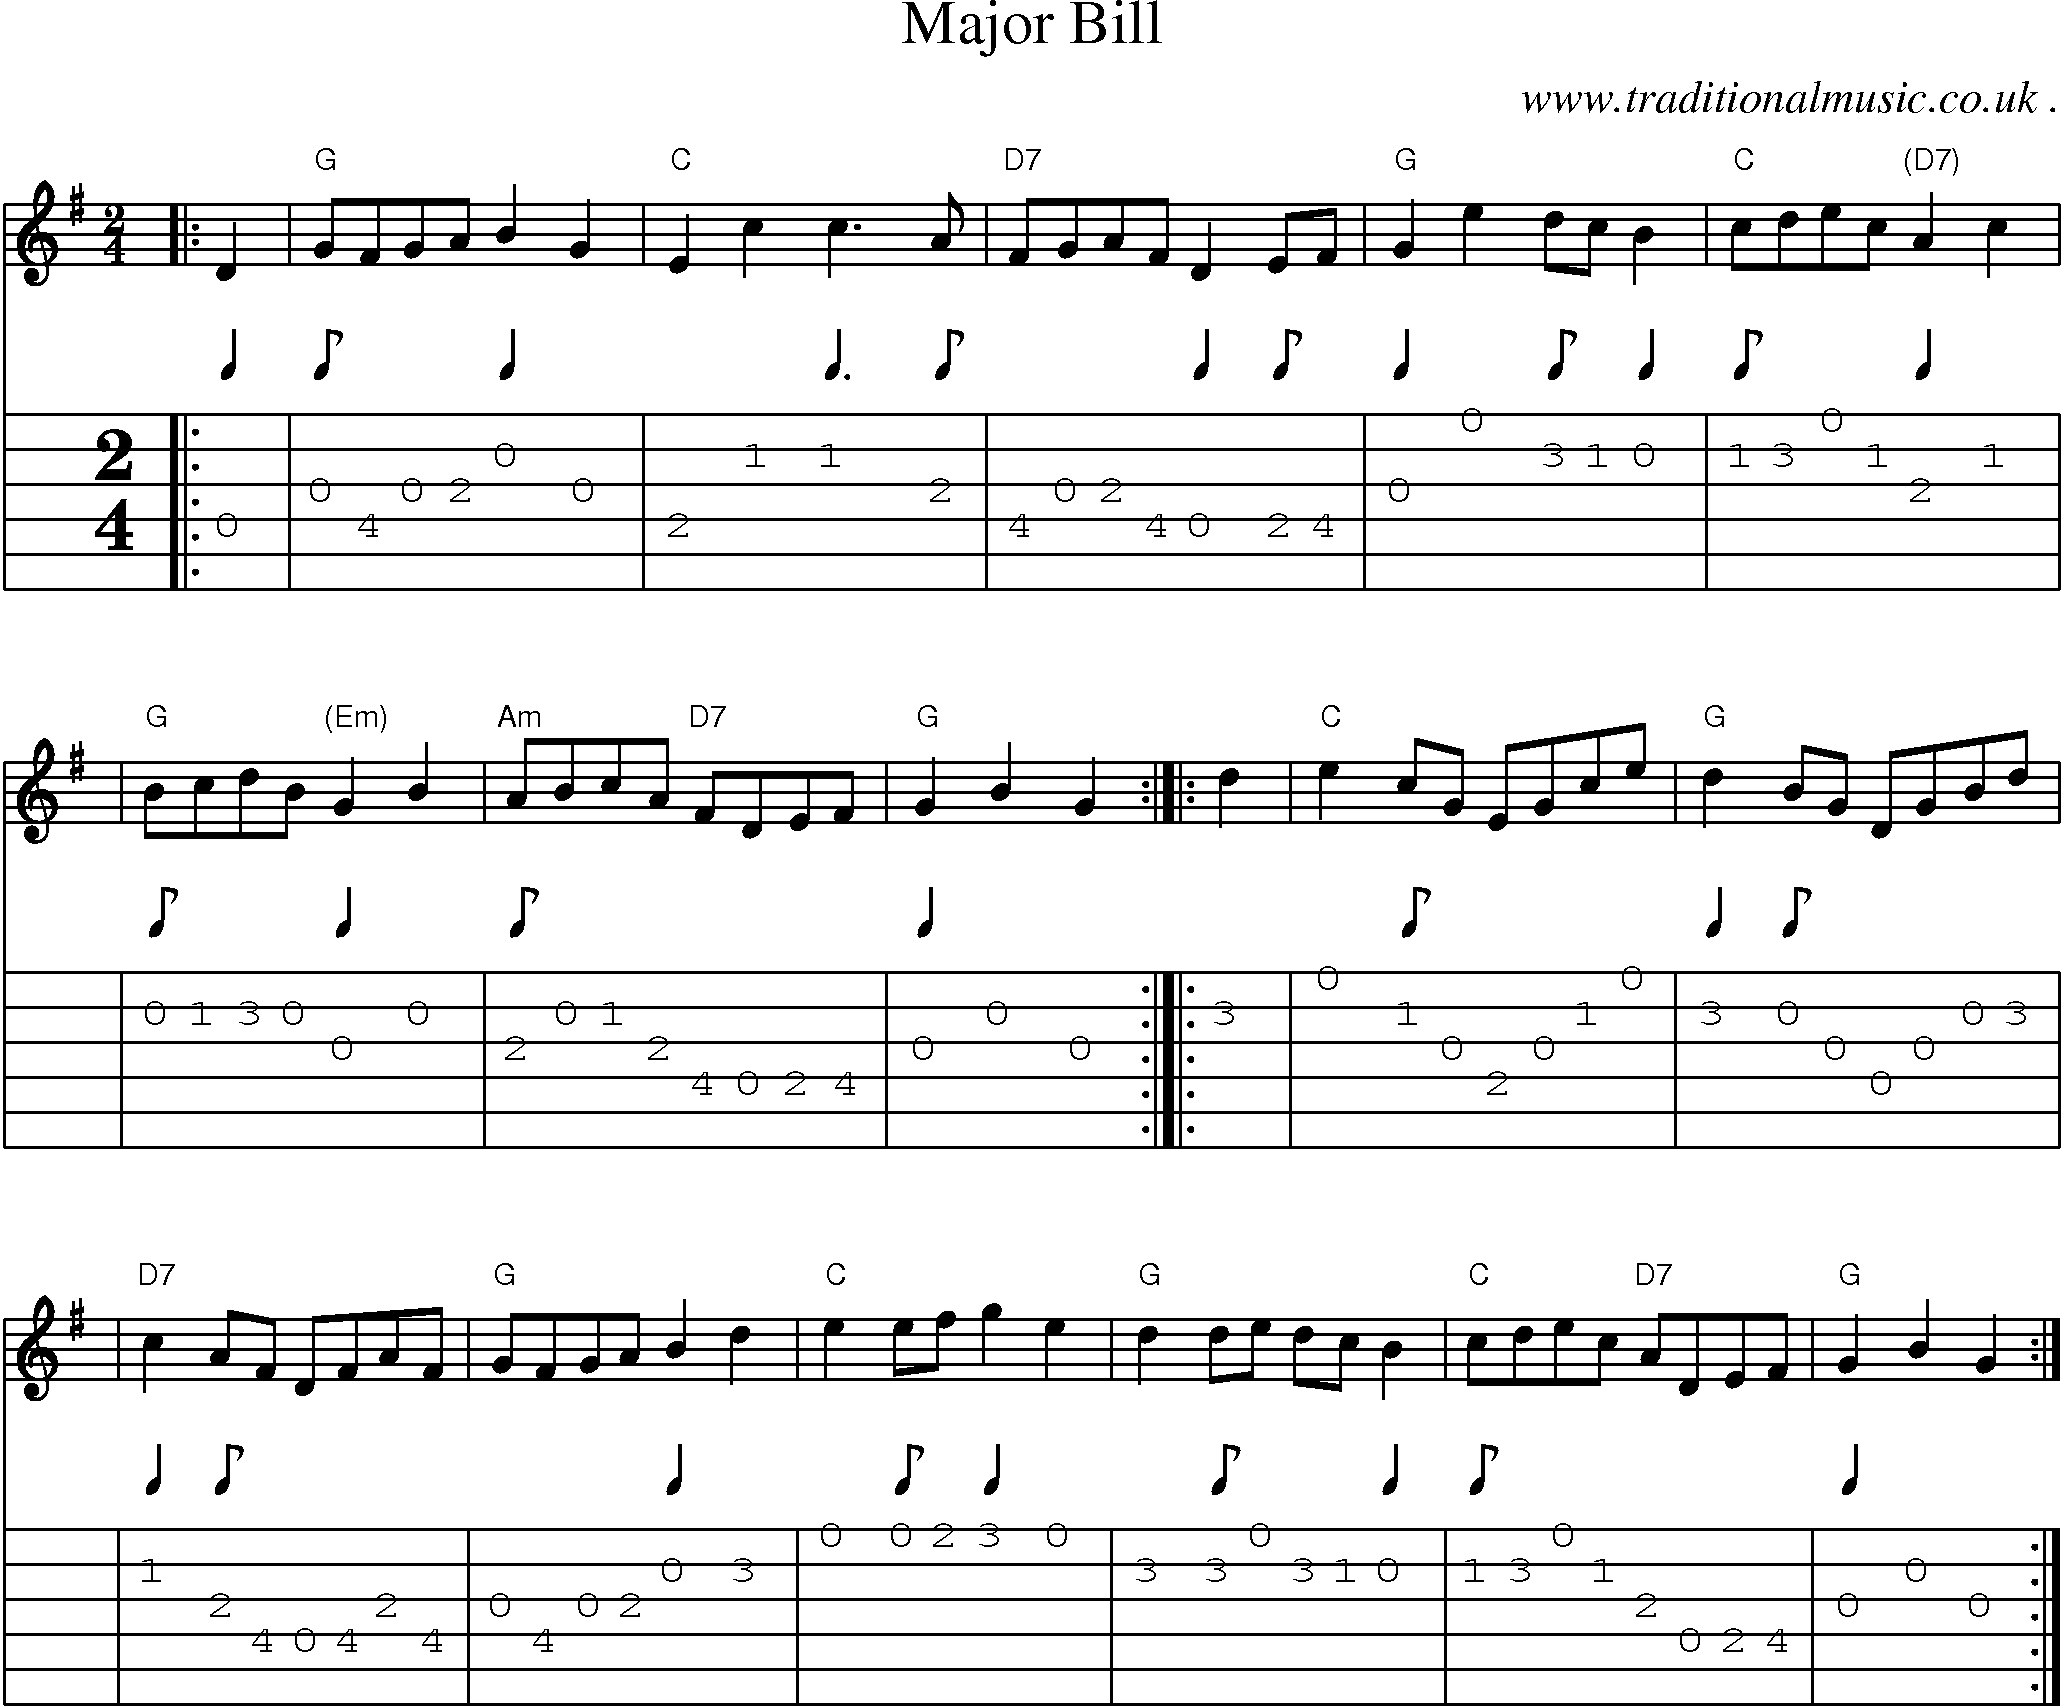 Sheet-music  score, Chords and Guitar Tabs for Major Bill